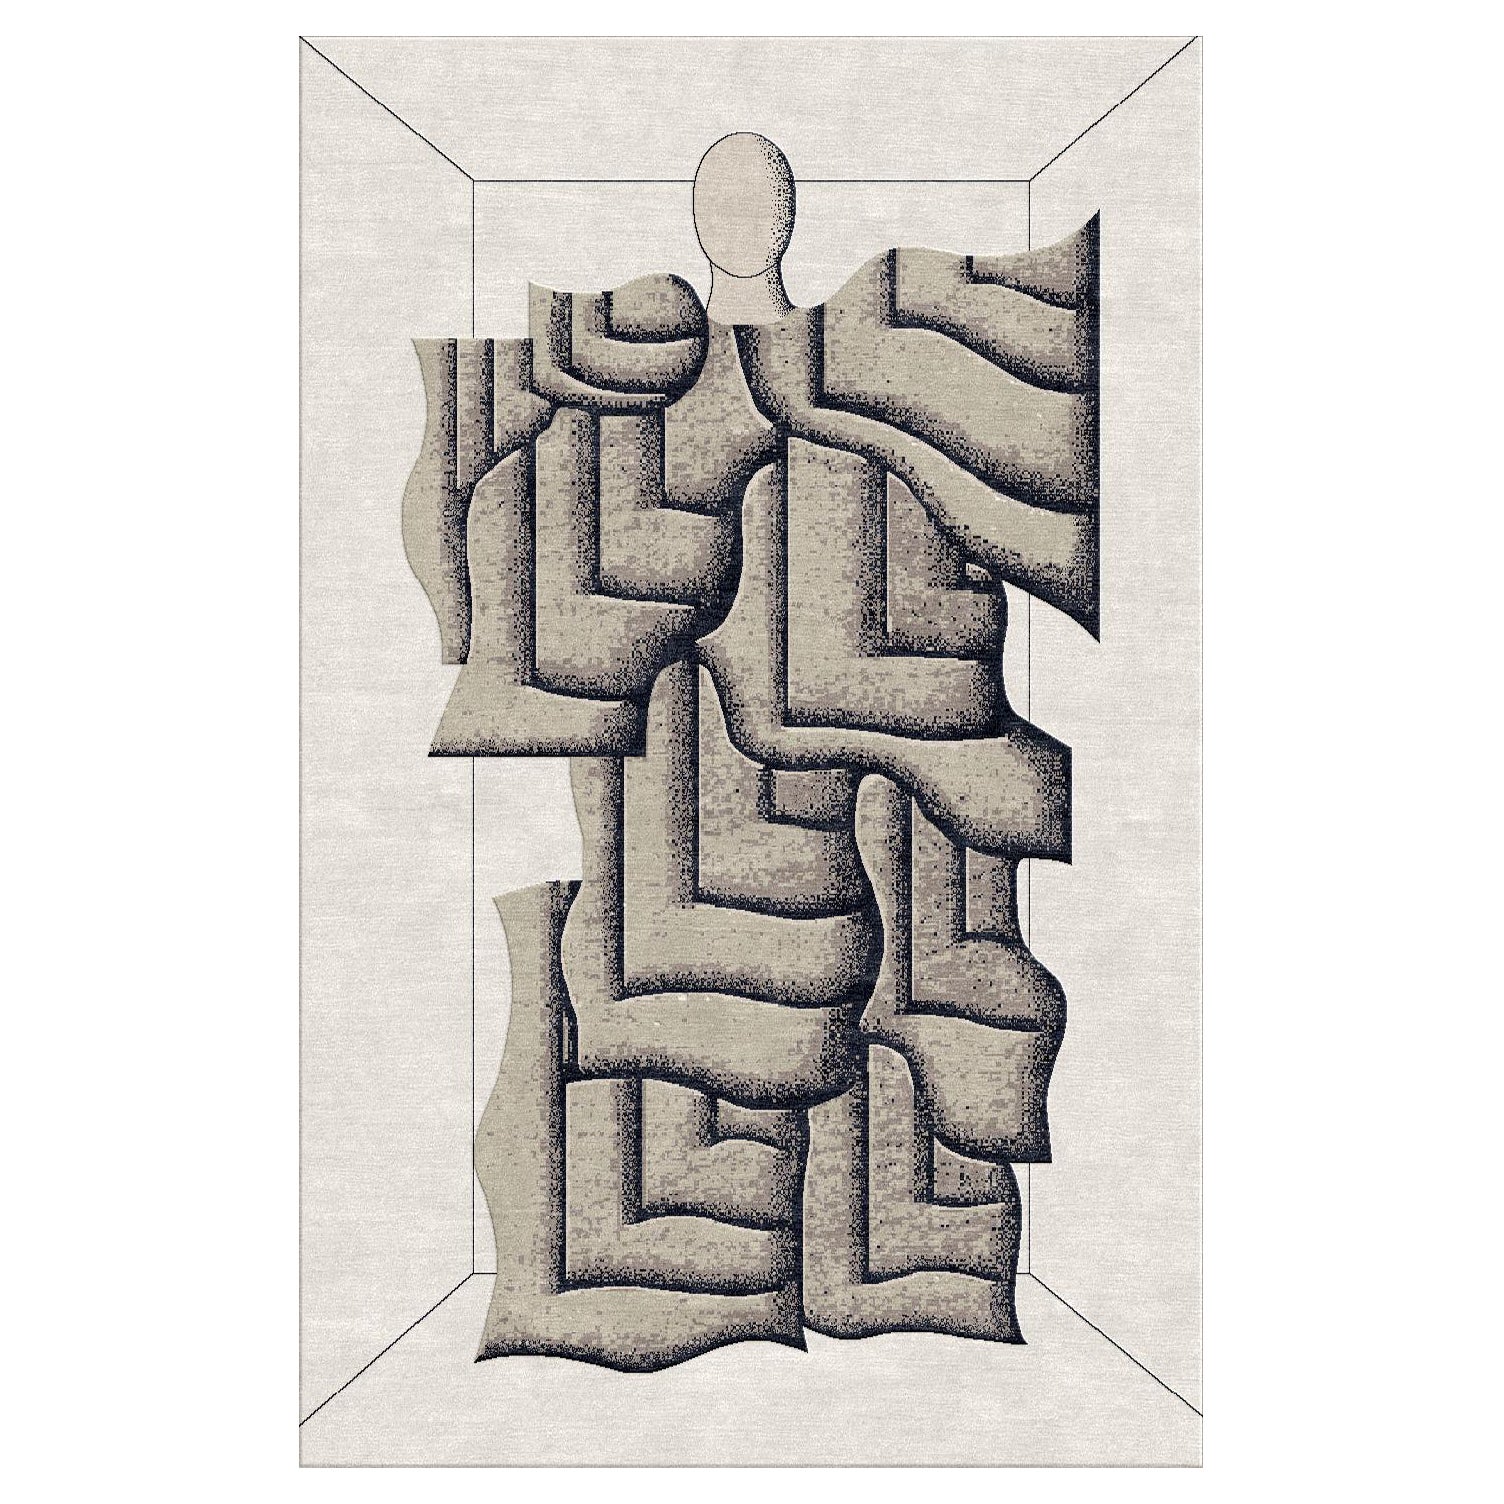 Hand-knotted wool rug "Character" by Roberto Aizenberg